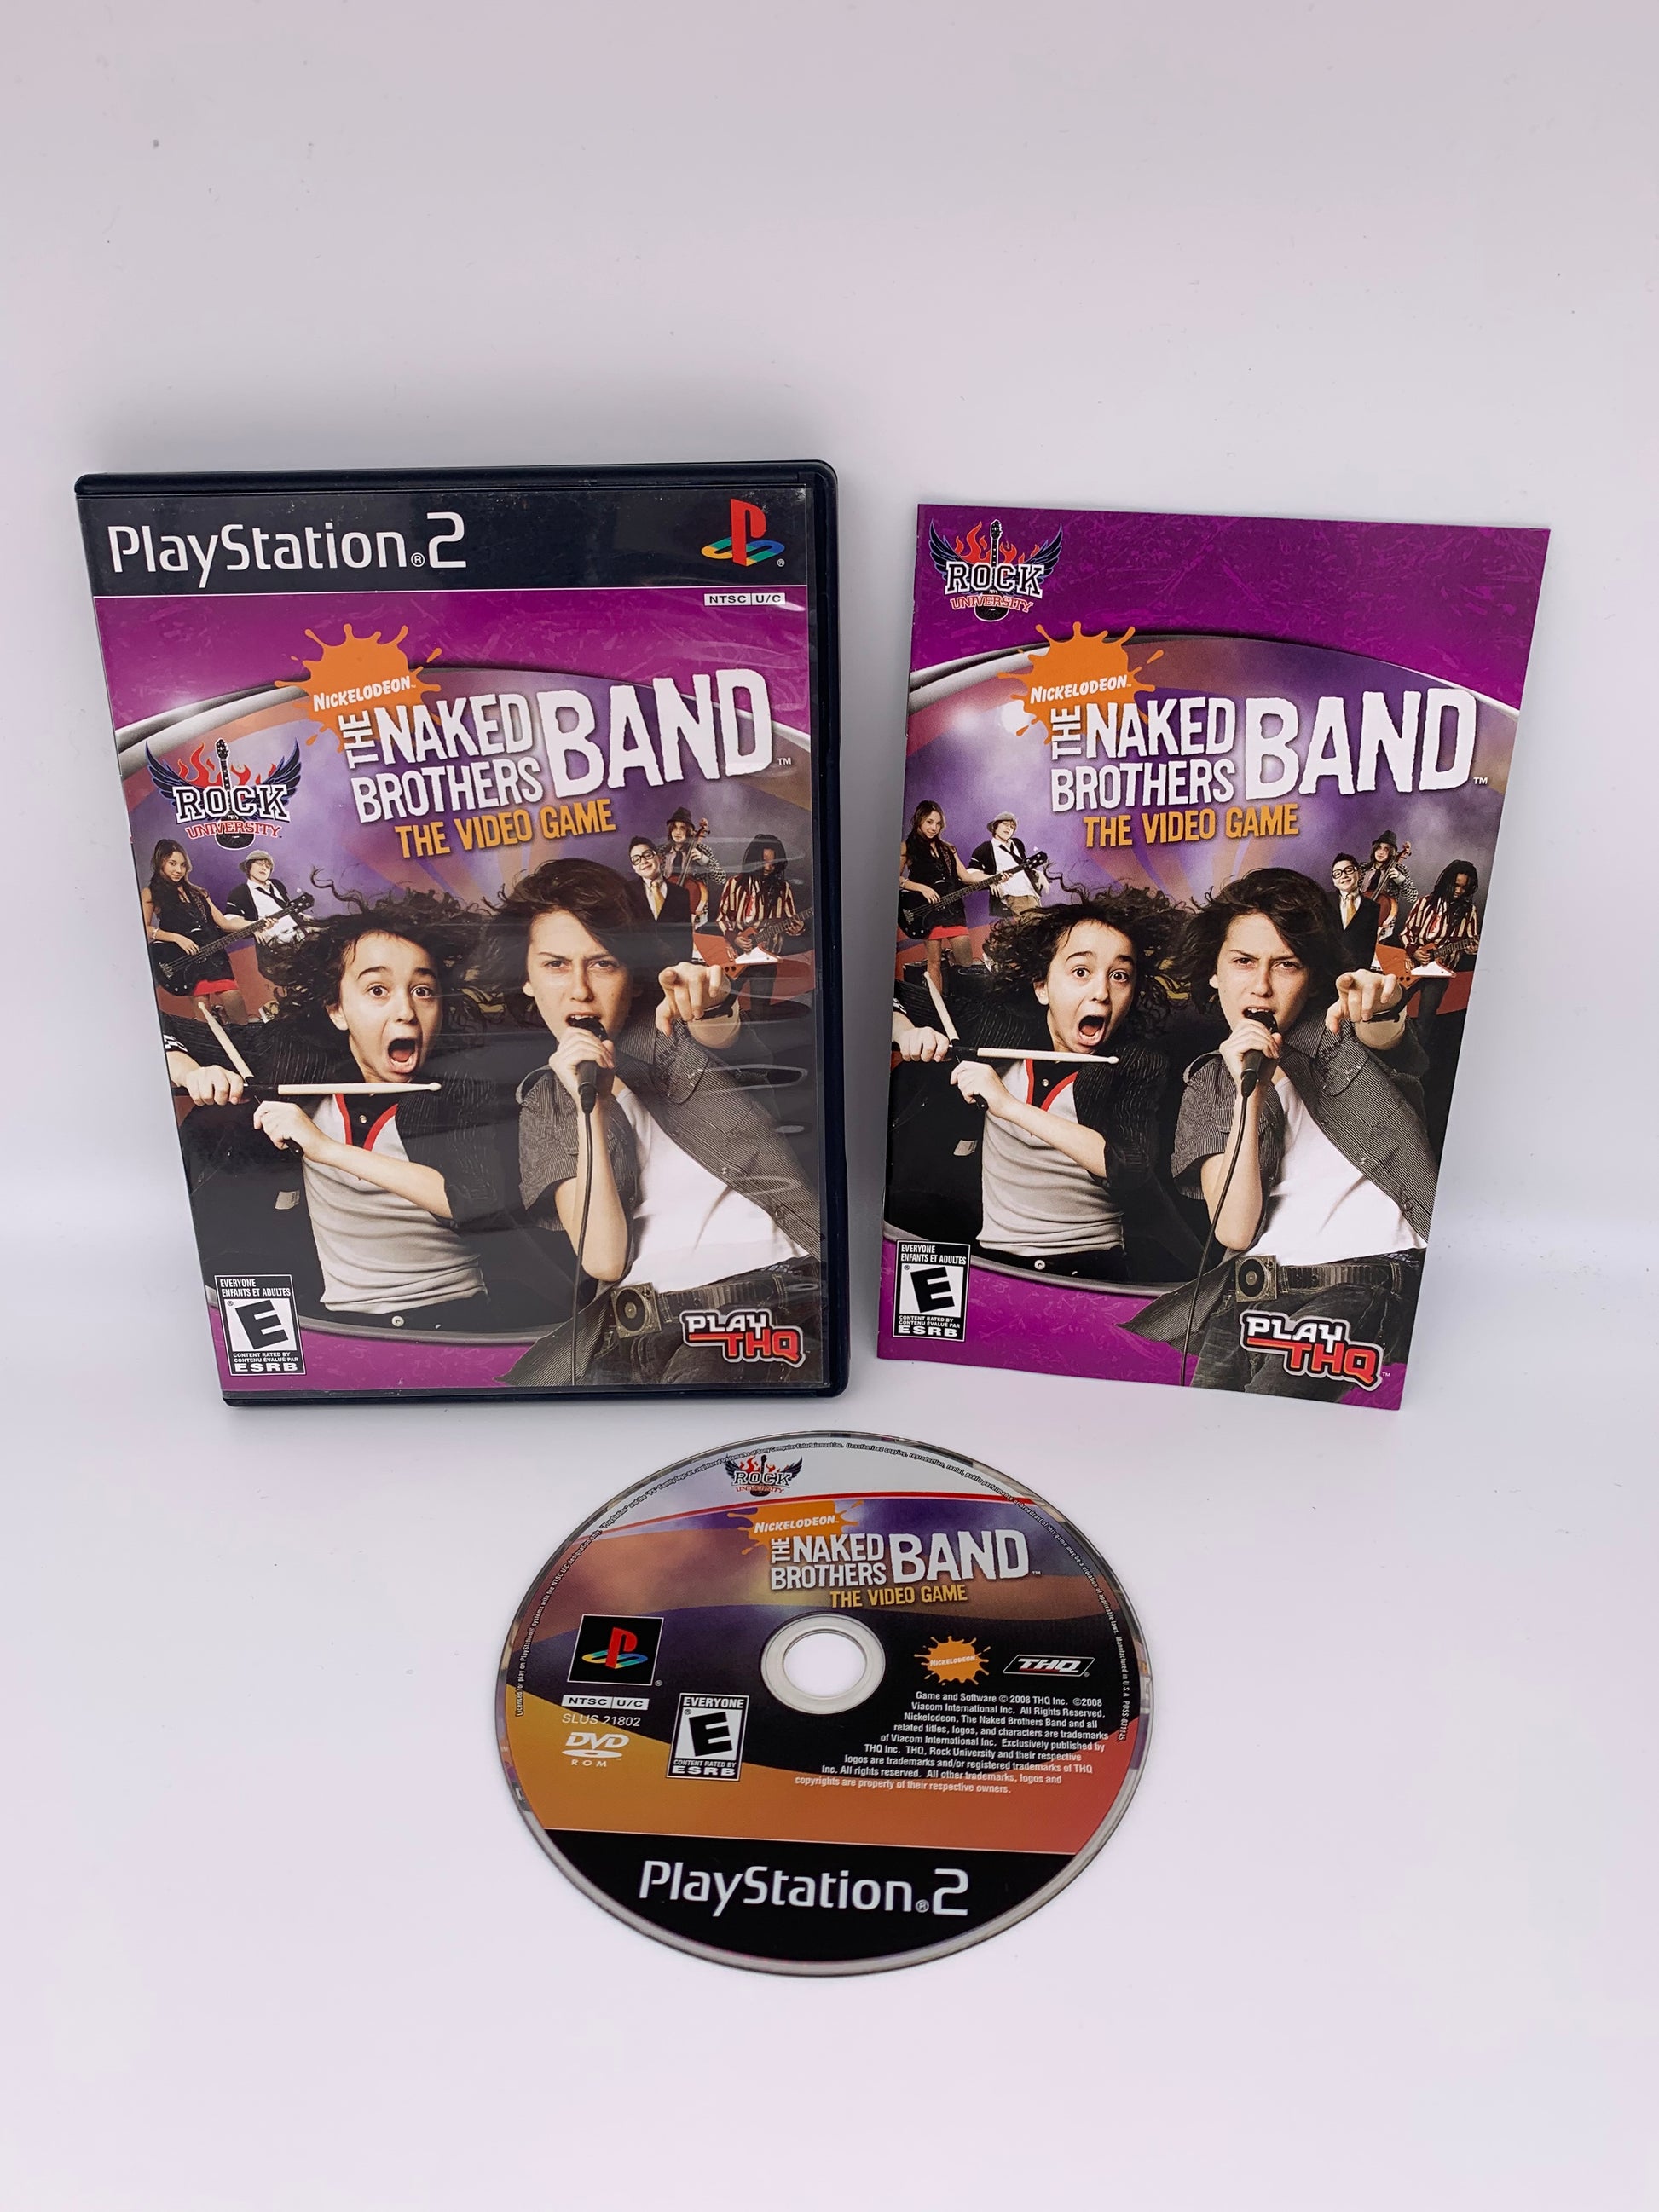 PiXEL-RETRO.COM : SONY PLAYSTATION 2 (PS2) NICKELODEON THE NAKED BROTHERS BAND THE VIDEO GAME COMPLET CIB BOX MANUAL GAME NTSC